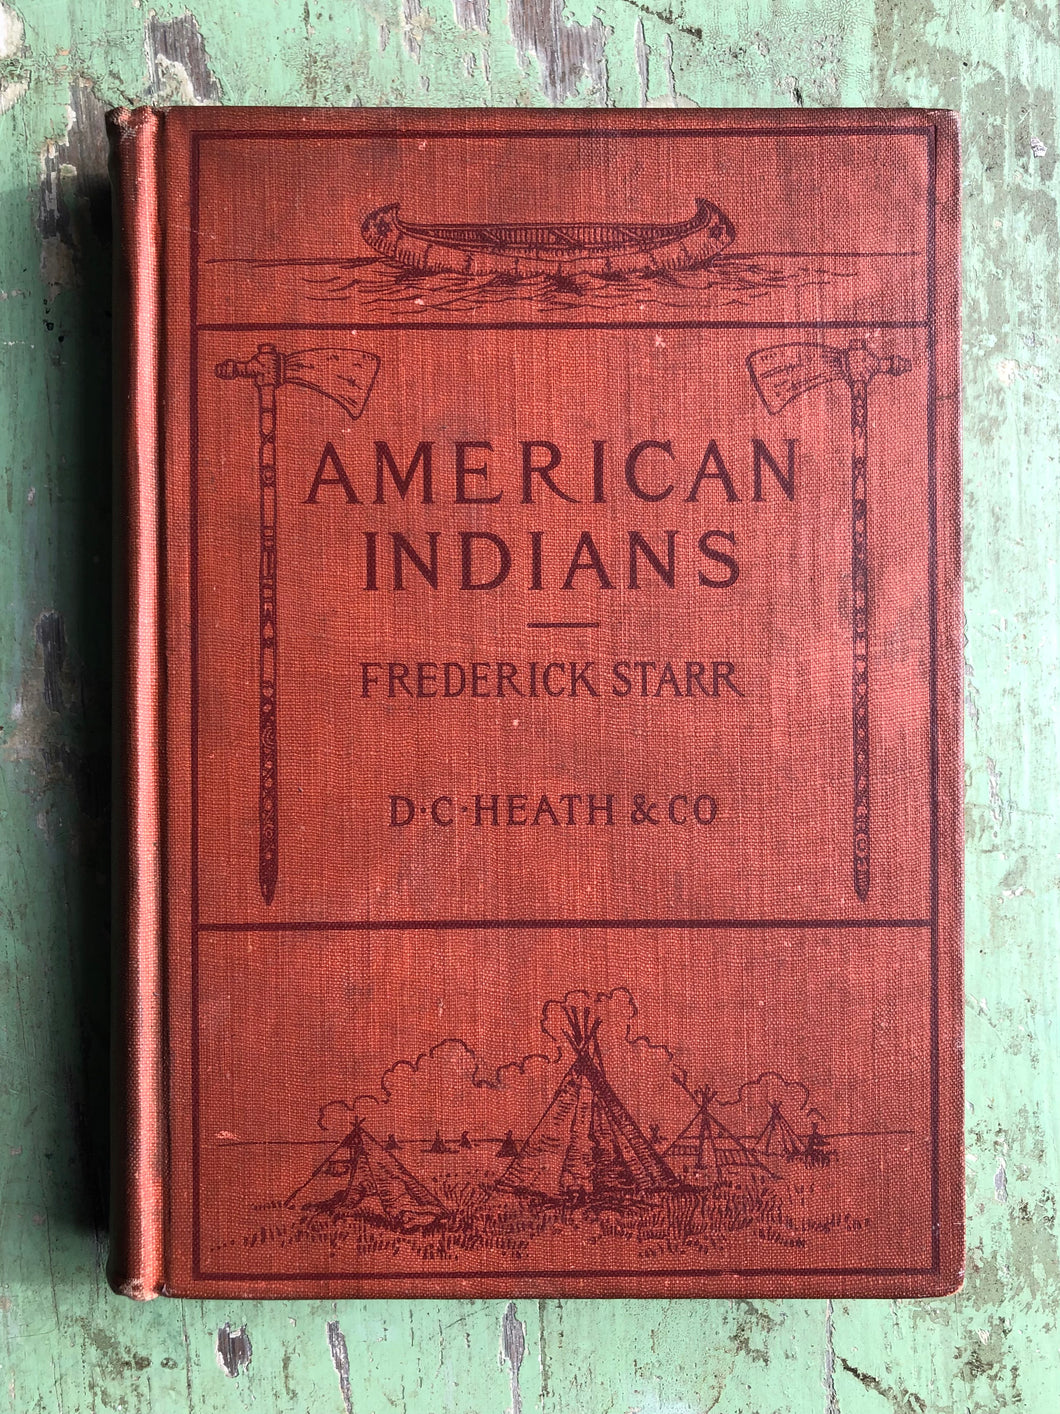 Ethno Geographic Reader, No. 2: American Indians by Frederick Starr